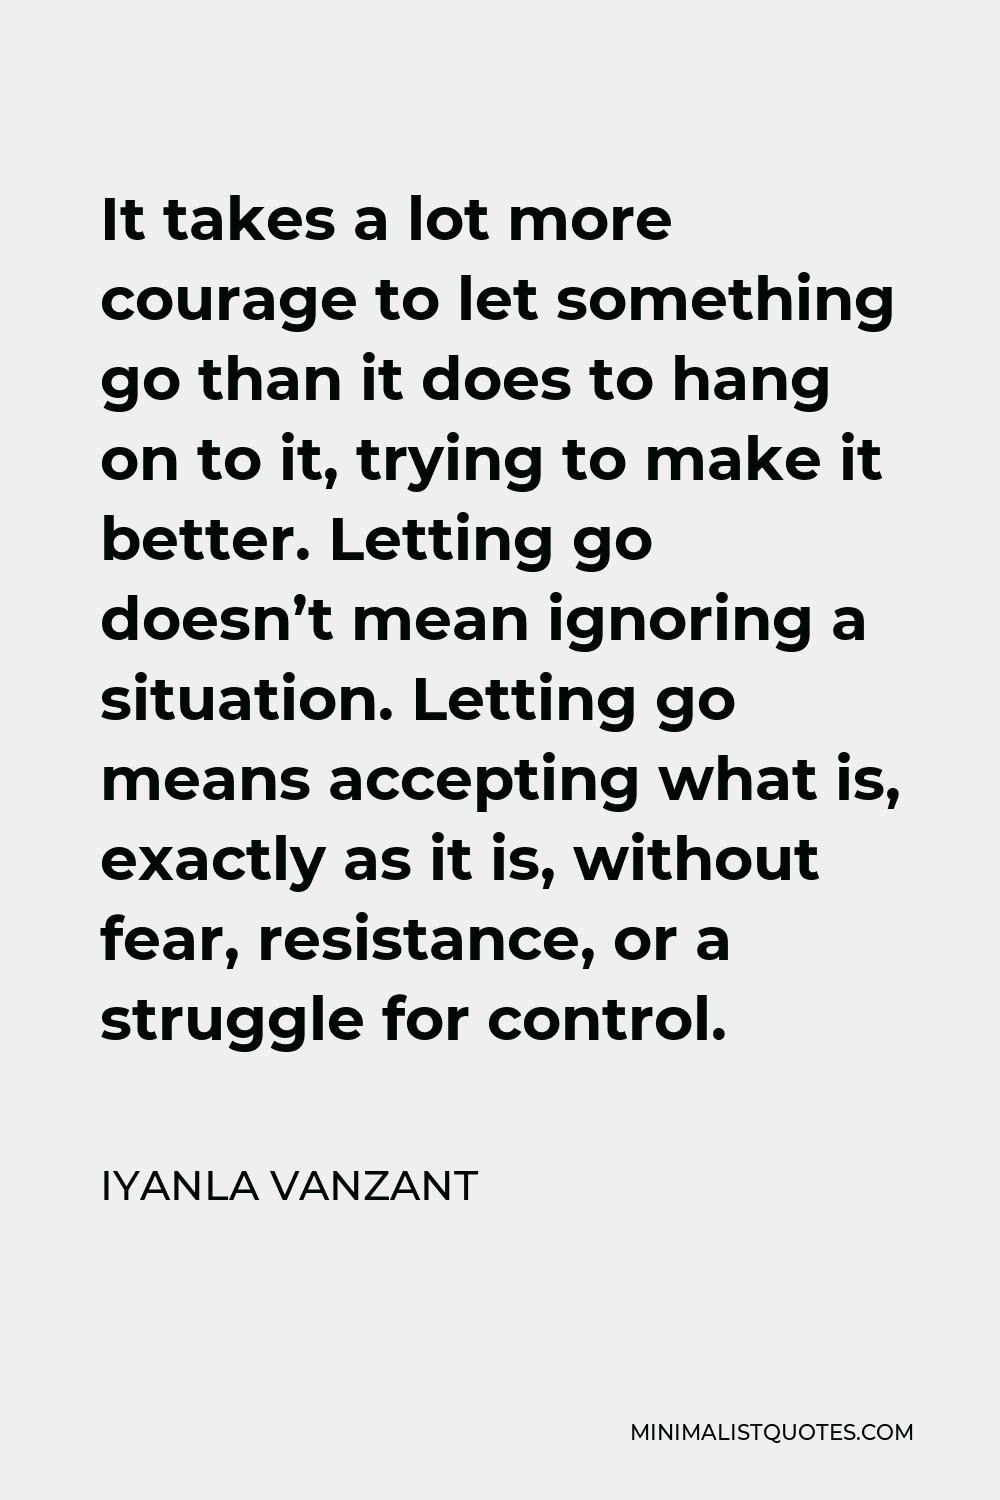 Iyanla Vanzant Quote - It takes a lot more courage to let something go than it does to hang on to it, trying to make it better. Letting go doesn’t mean ignoring a situation. Letting go means accepting what is, exactly as it is, without fear, resistance, or a struggle for control.